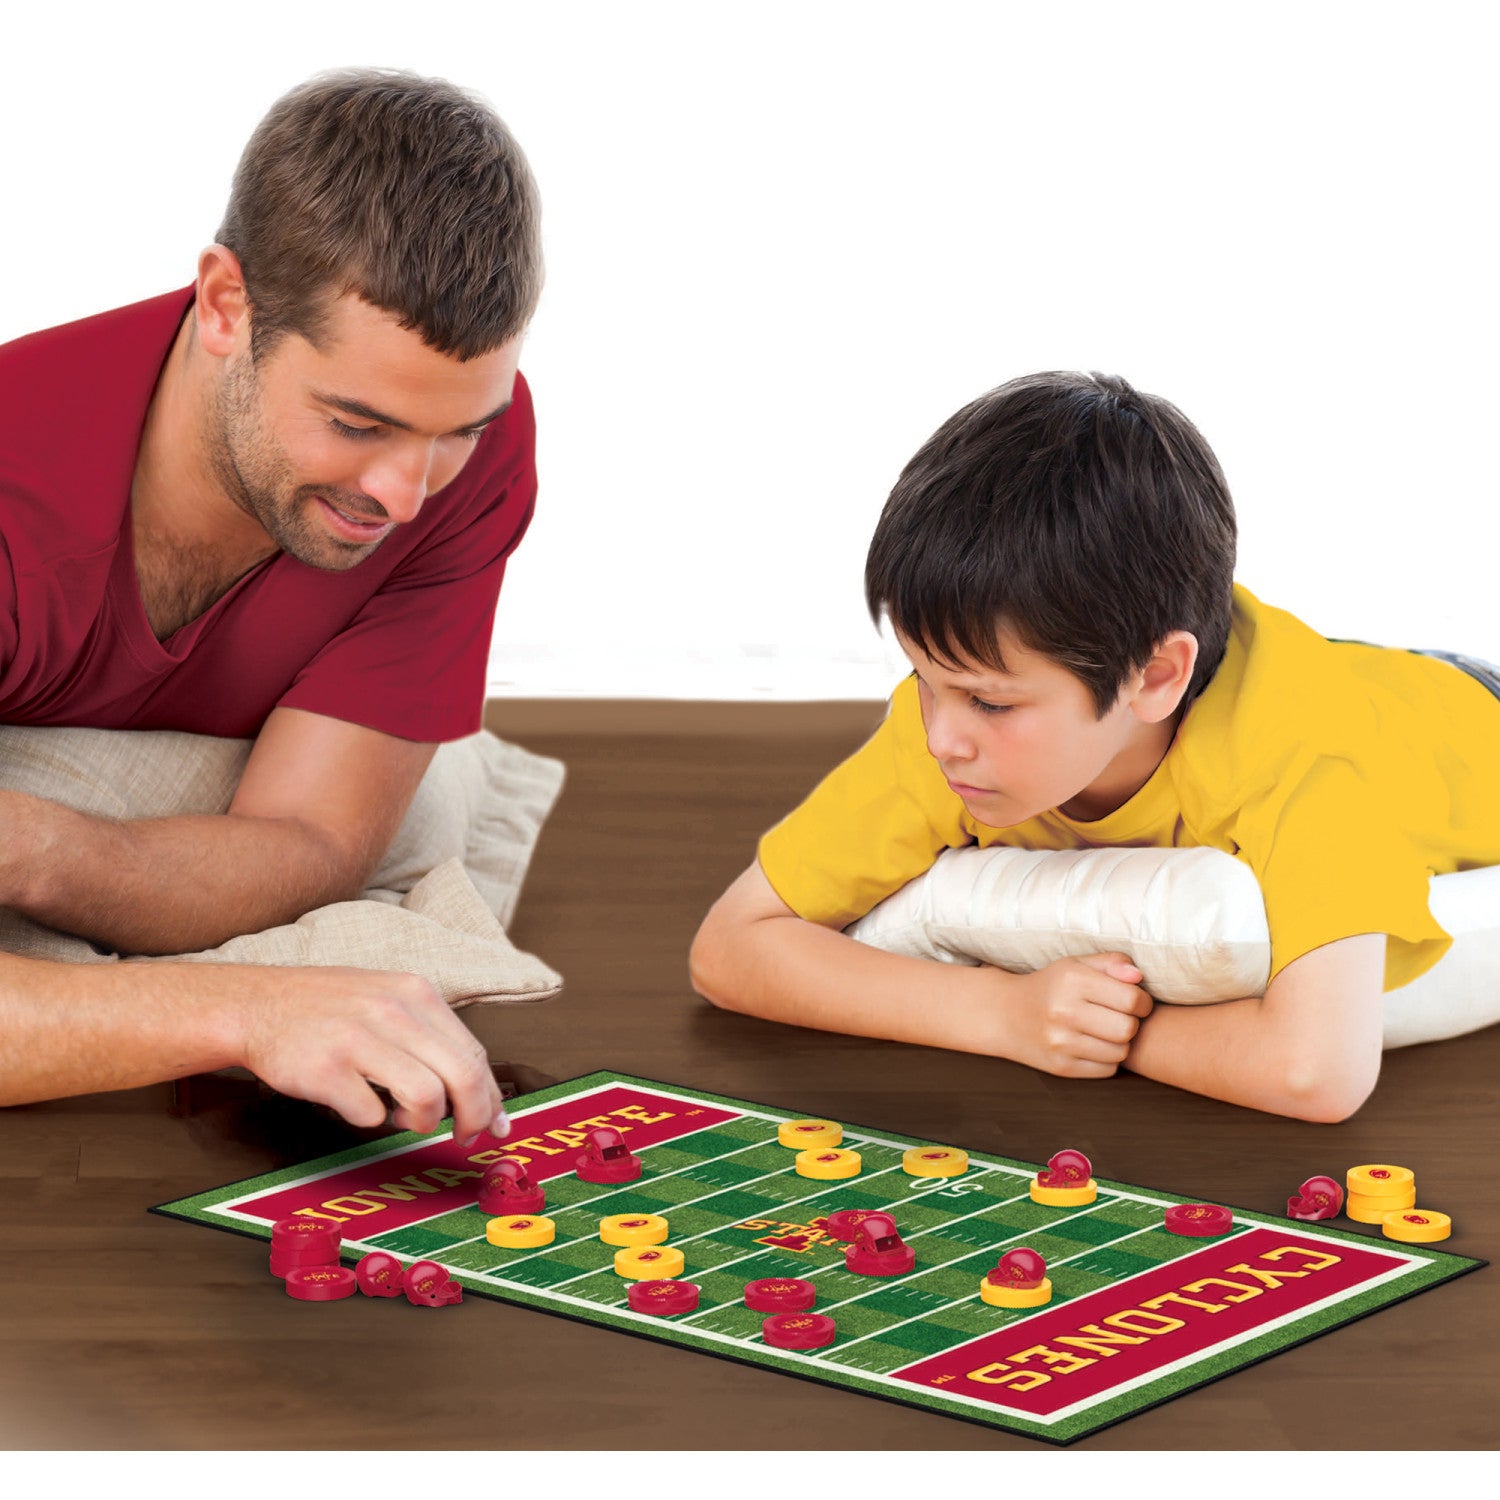 Iowa State Cyclones Checkers Board Game